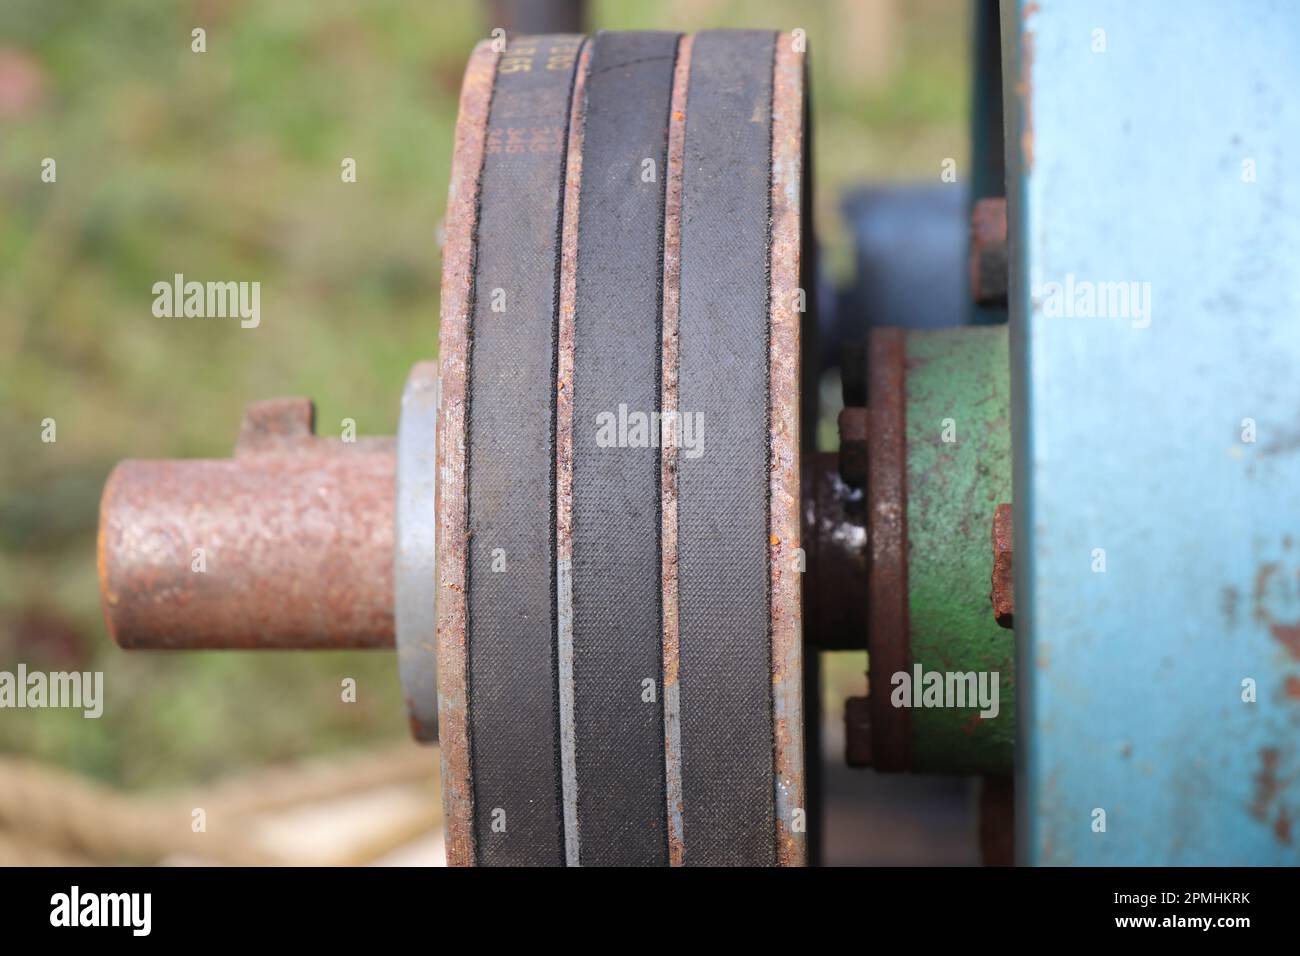 Belt of Diesel engine water pump, Close up of belt transmission system between the engine and the centrifugal water pump Stock Photo